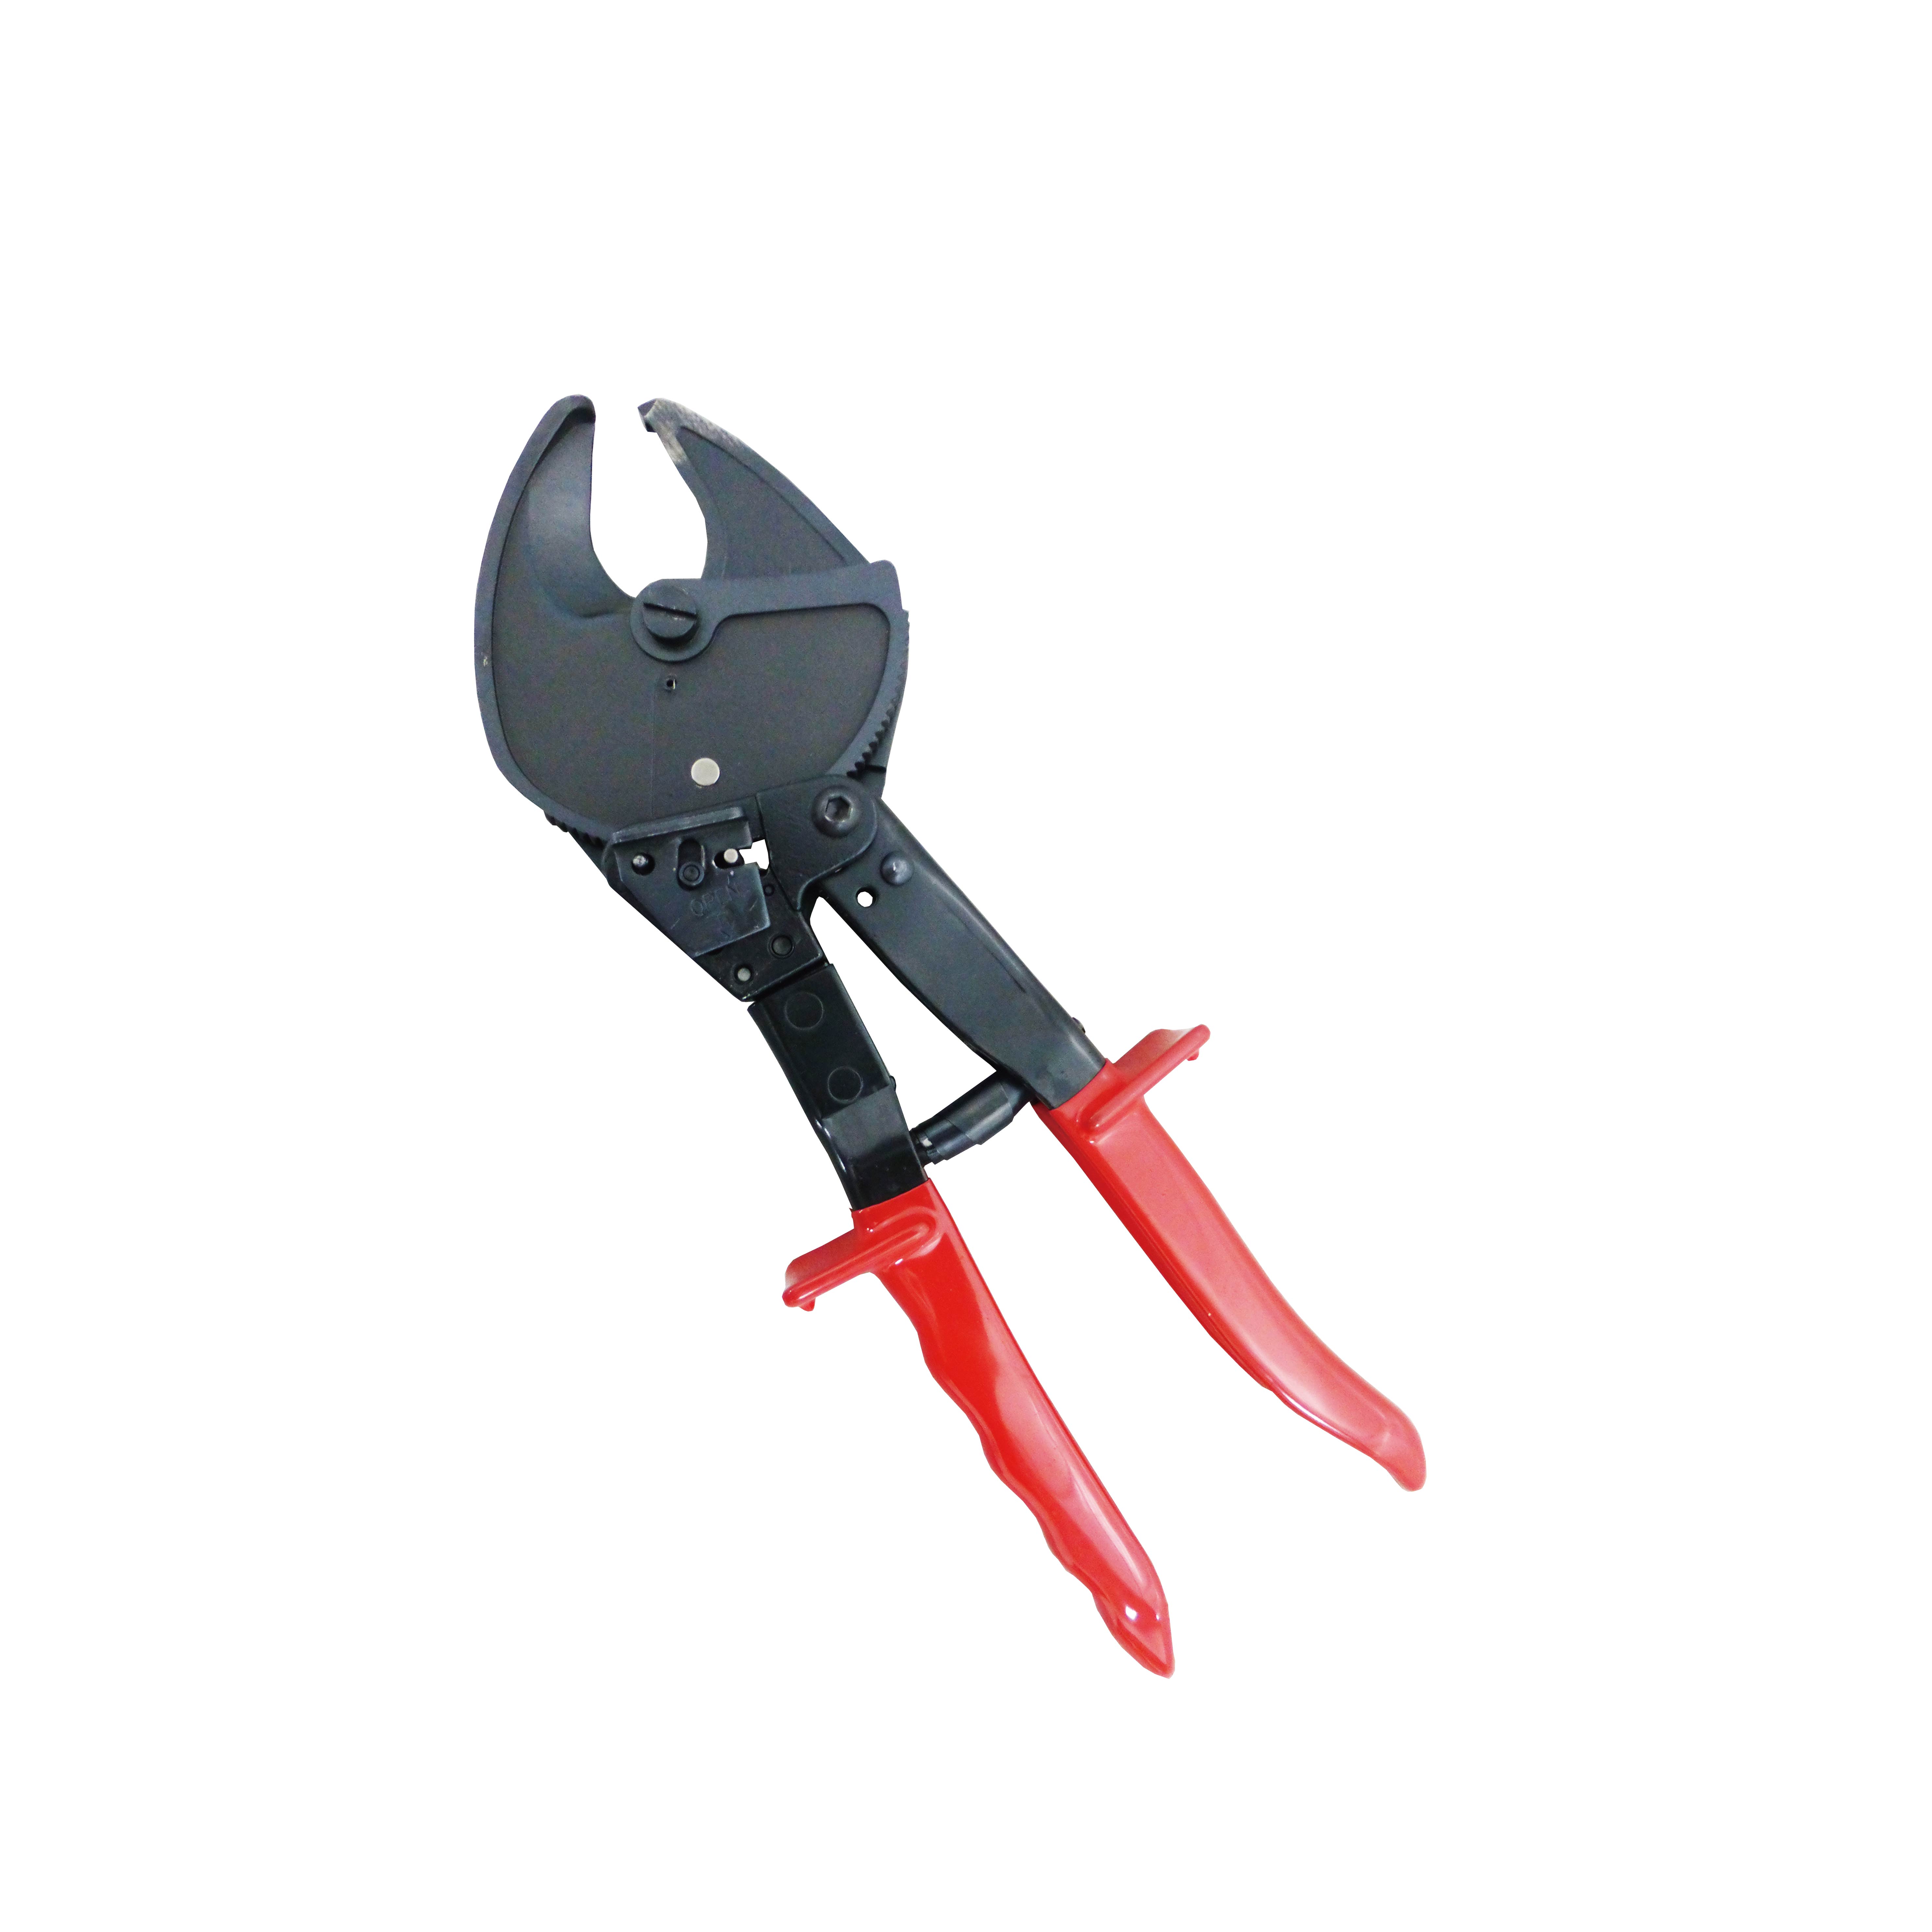 LK-325Y HAND CABLE CUTTERS